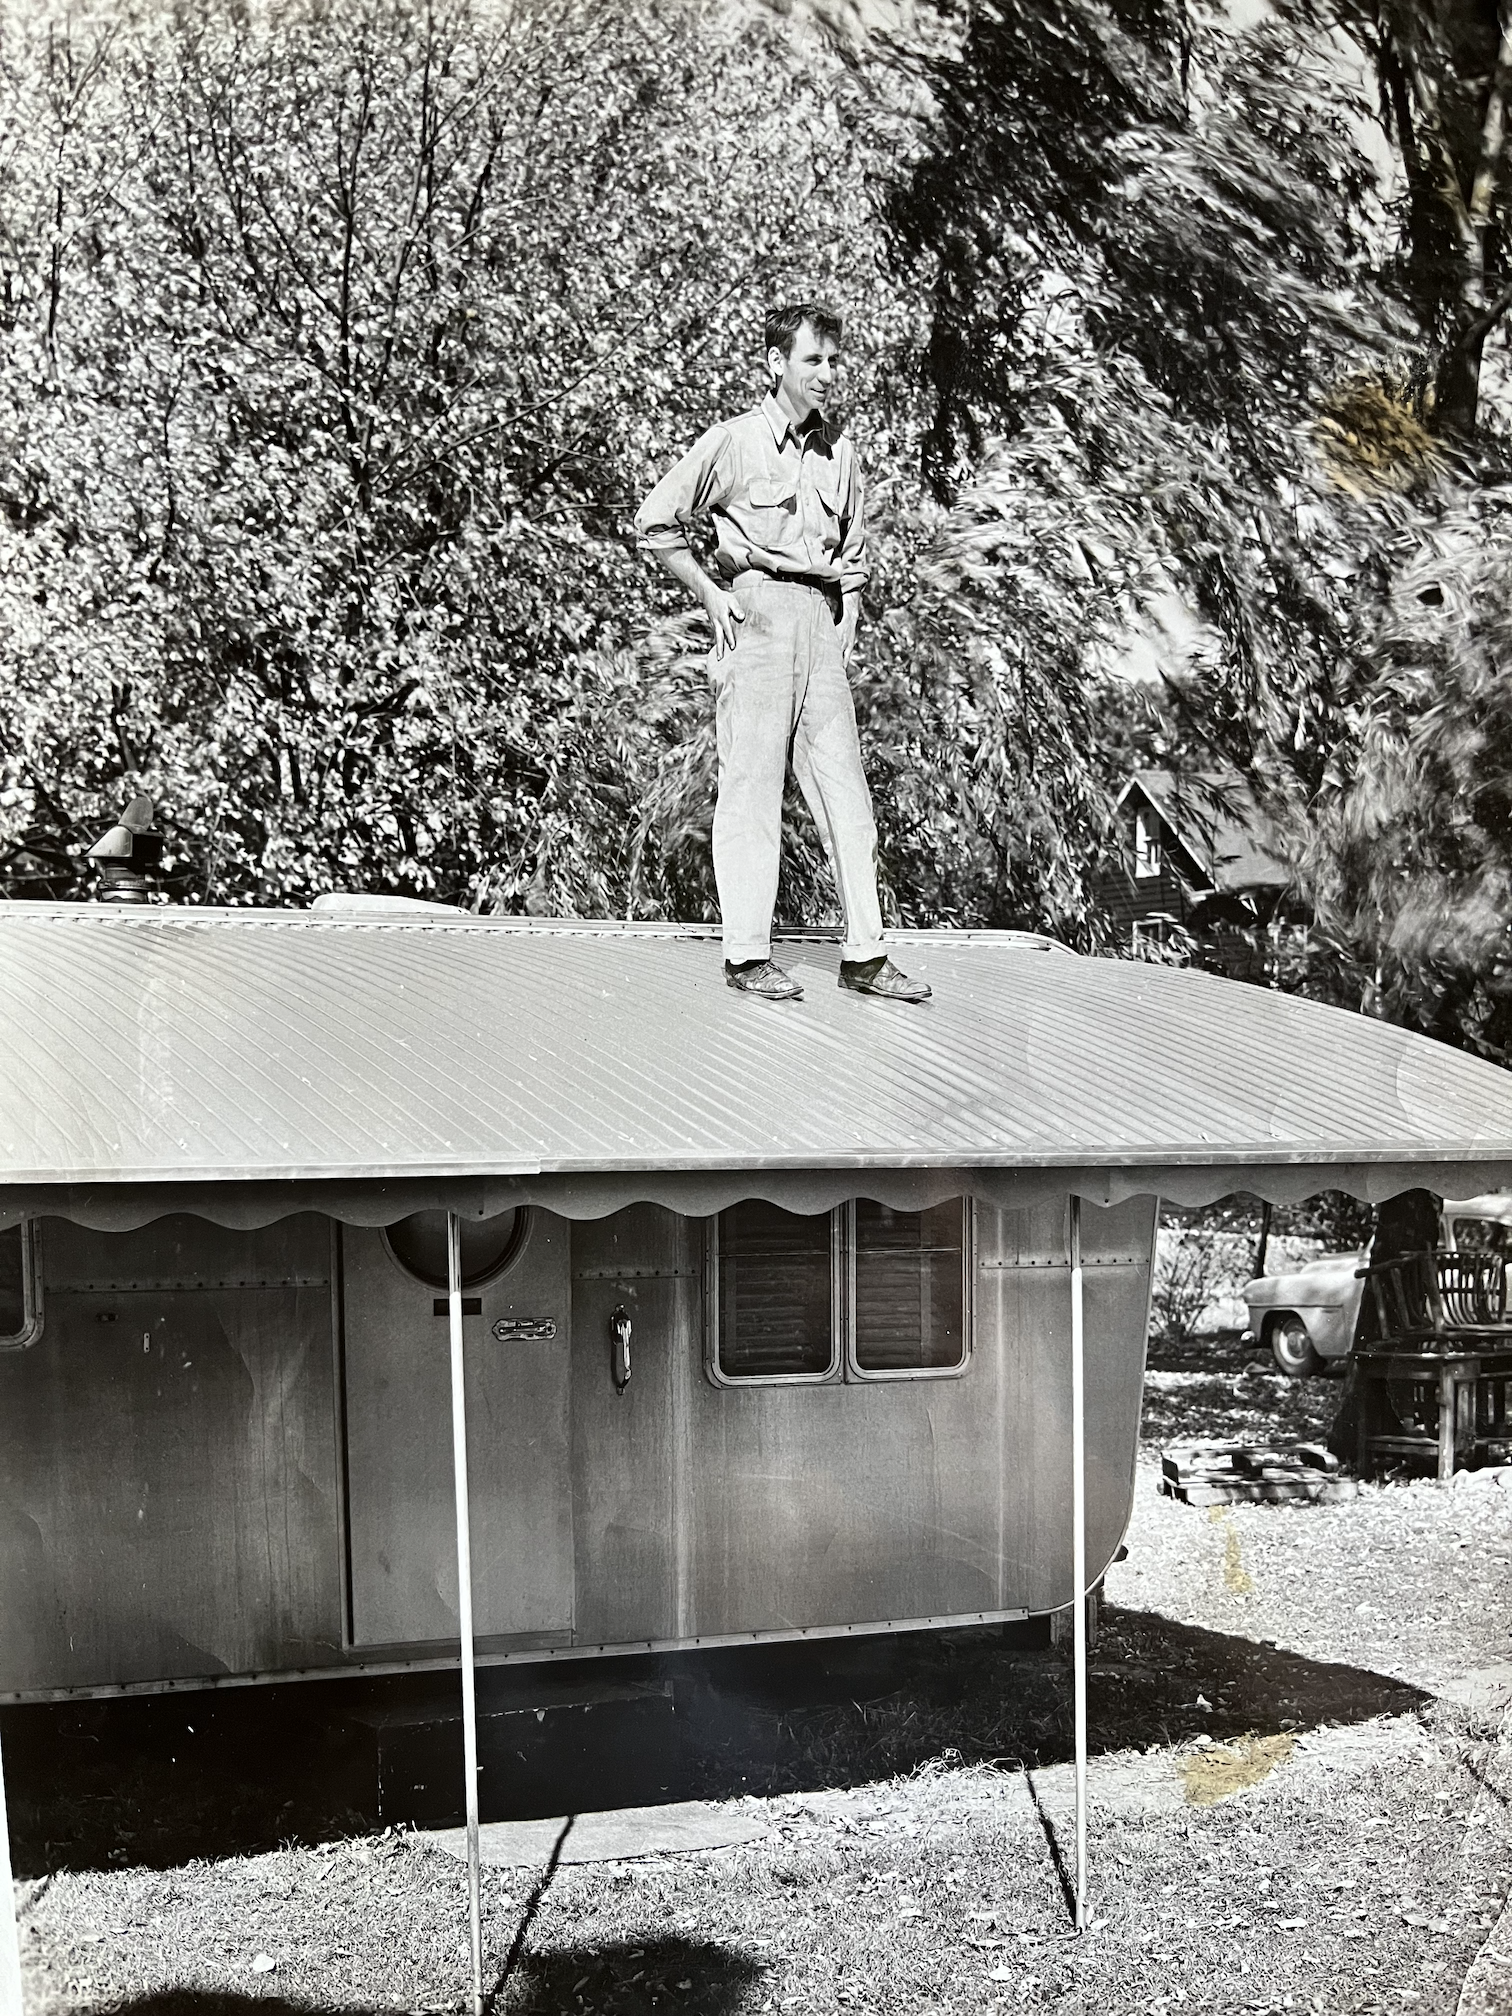 "Bill" Struben / Founder of Silver-top on his first awning, the S-1 (1947)